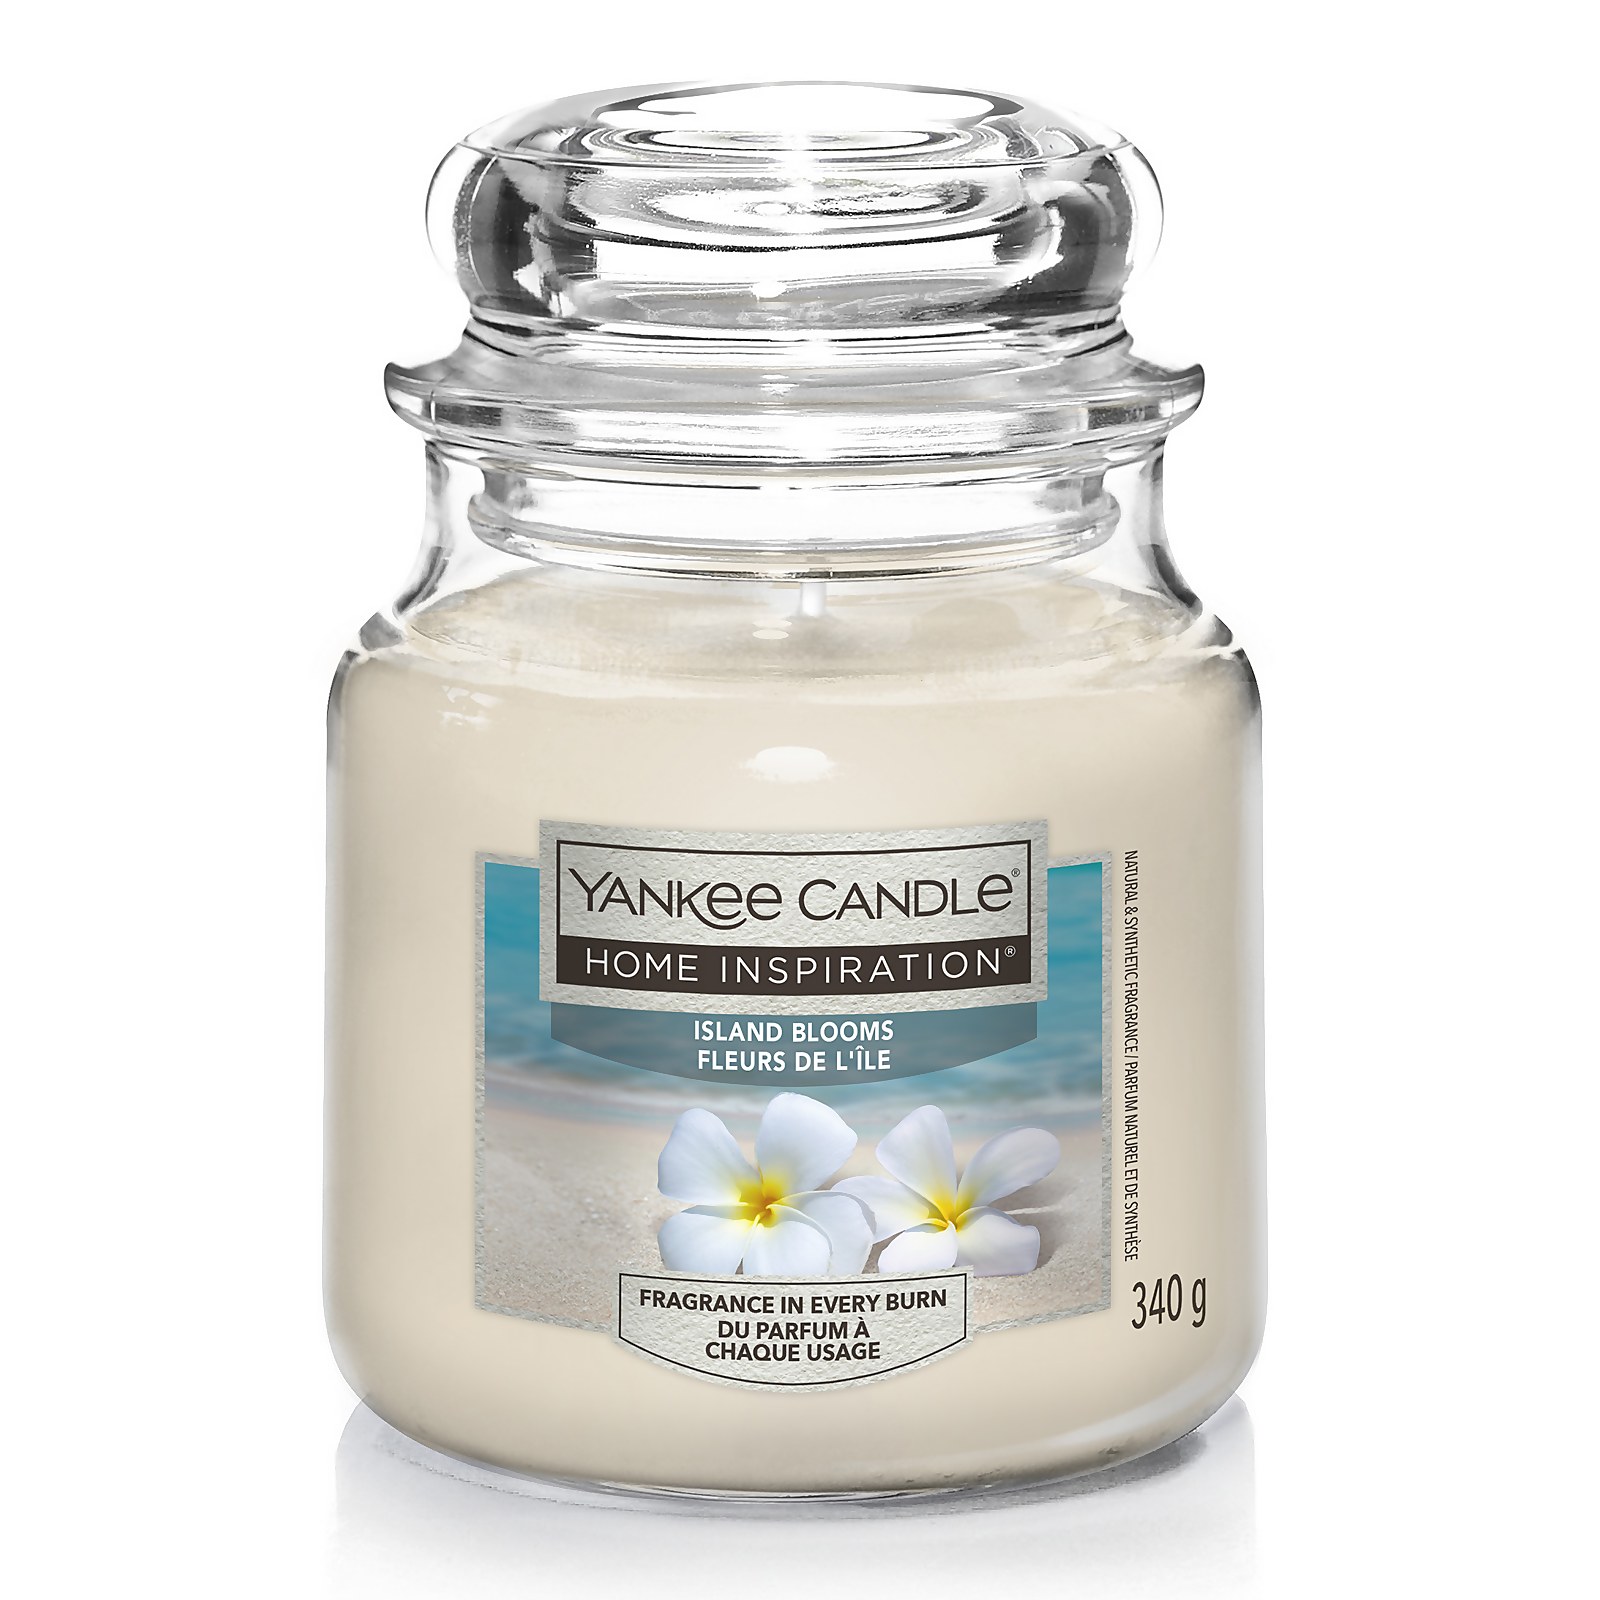 Photo of Yankee Candle Home Inspiration Scented Candle - Medium Jar - Island Blooms